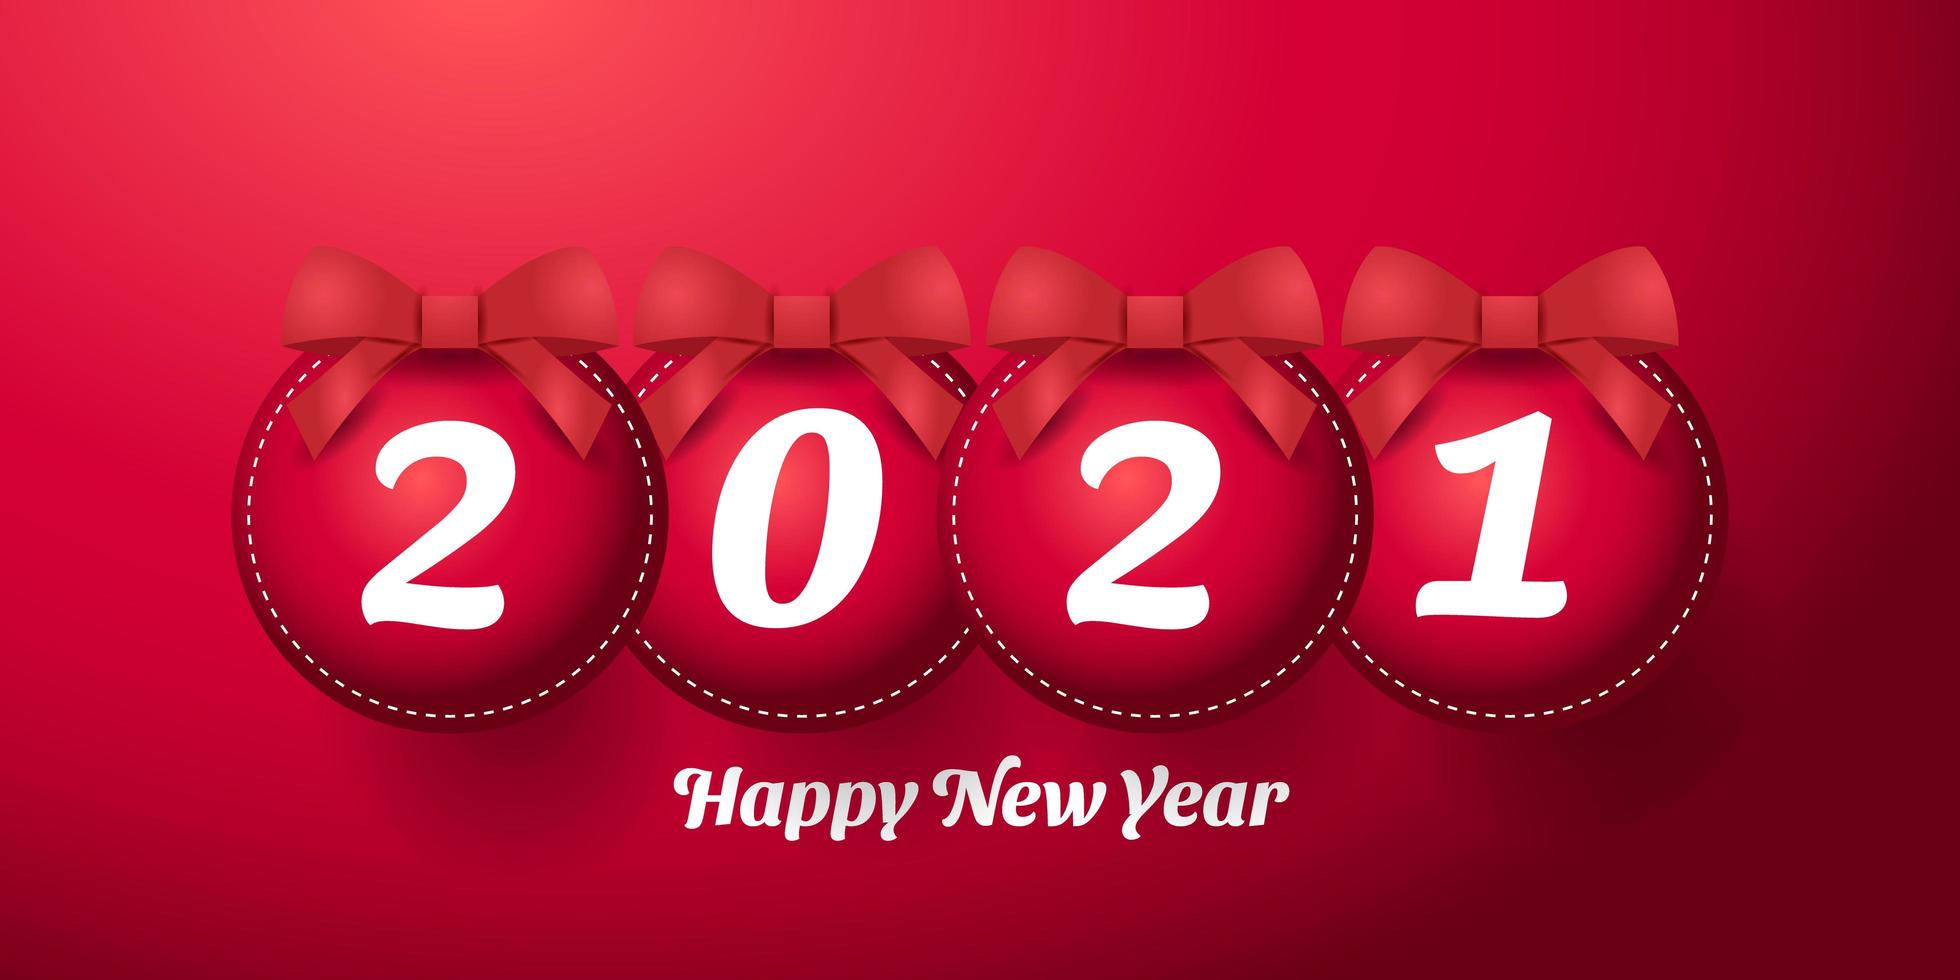 Happy New Year 2021 Marathi Wishes, SMS, Messages, Text ...